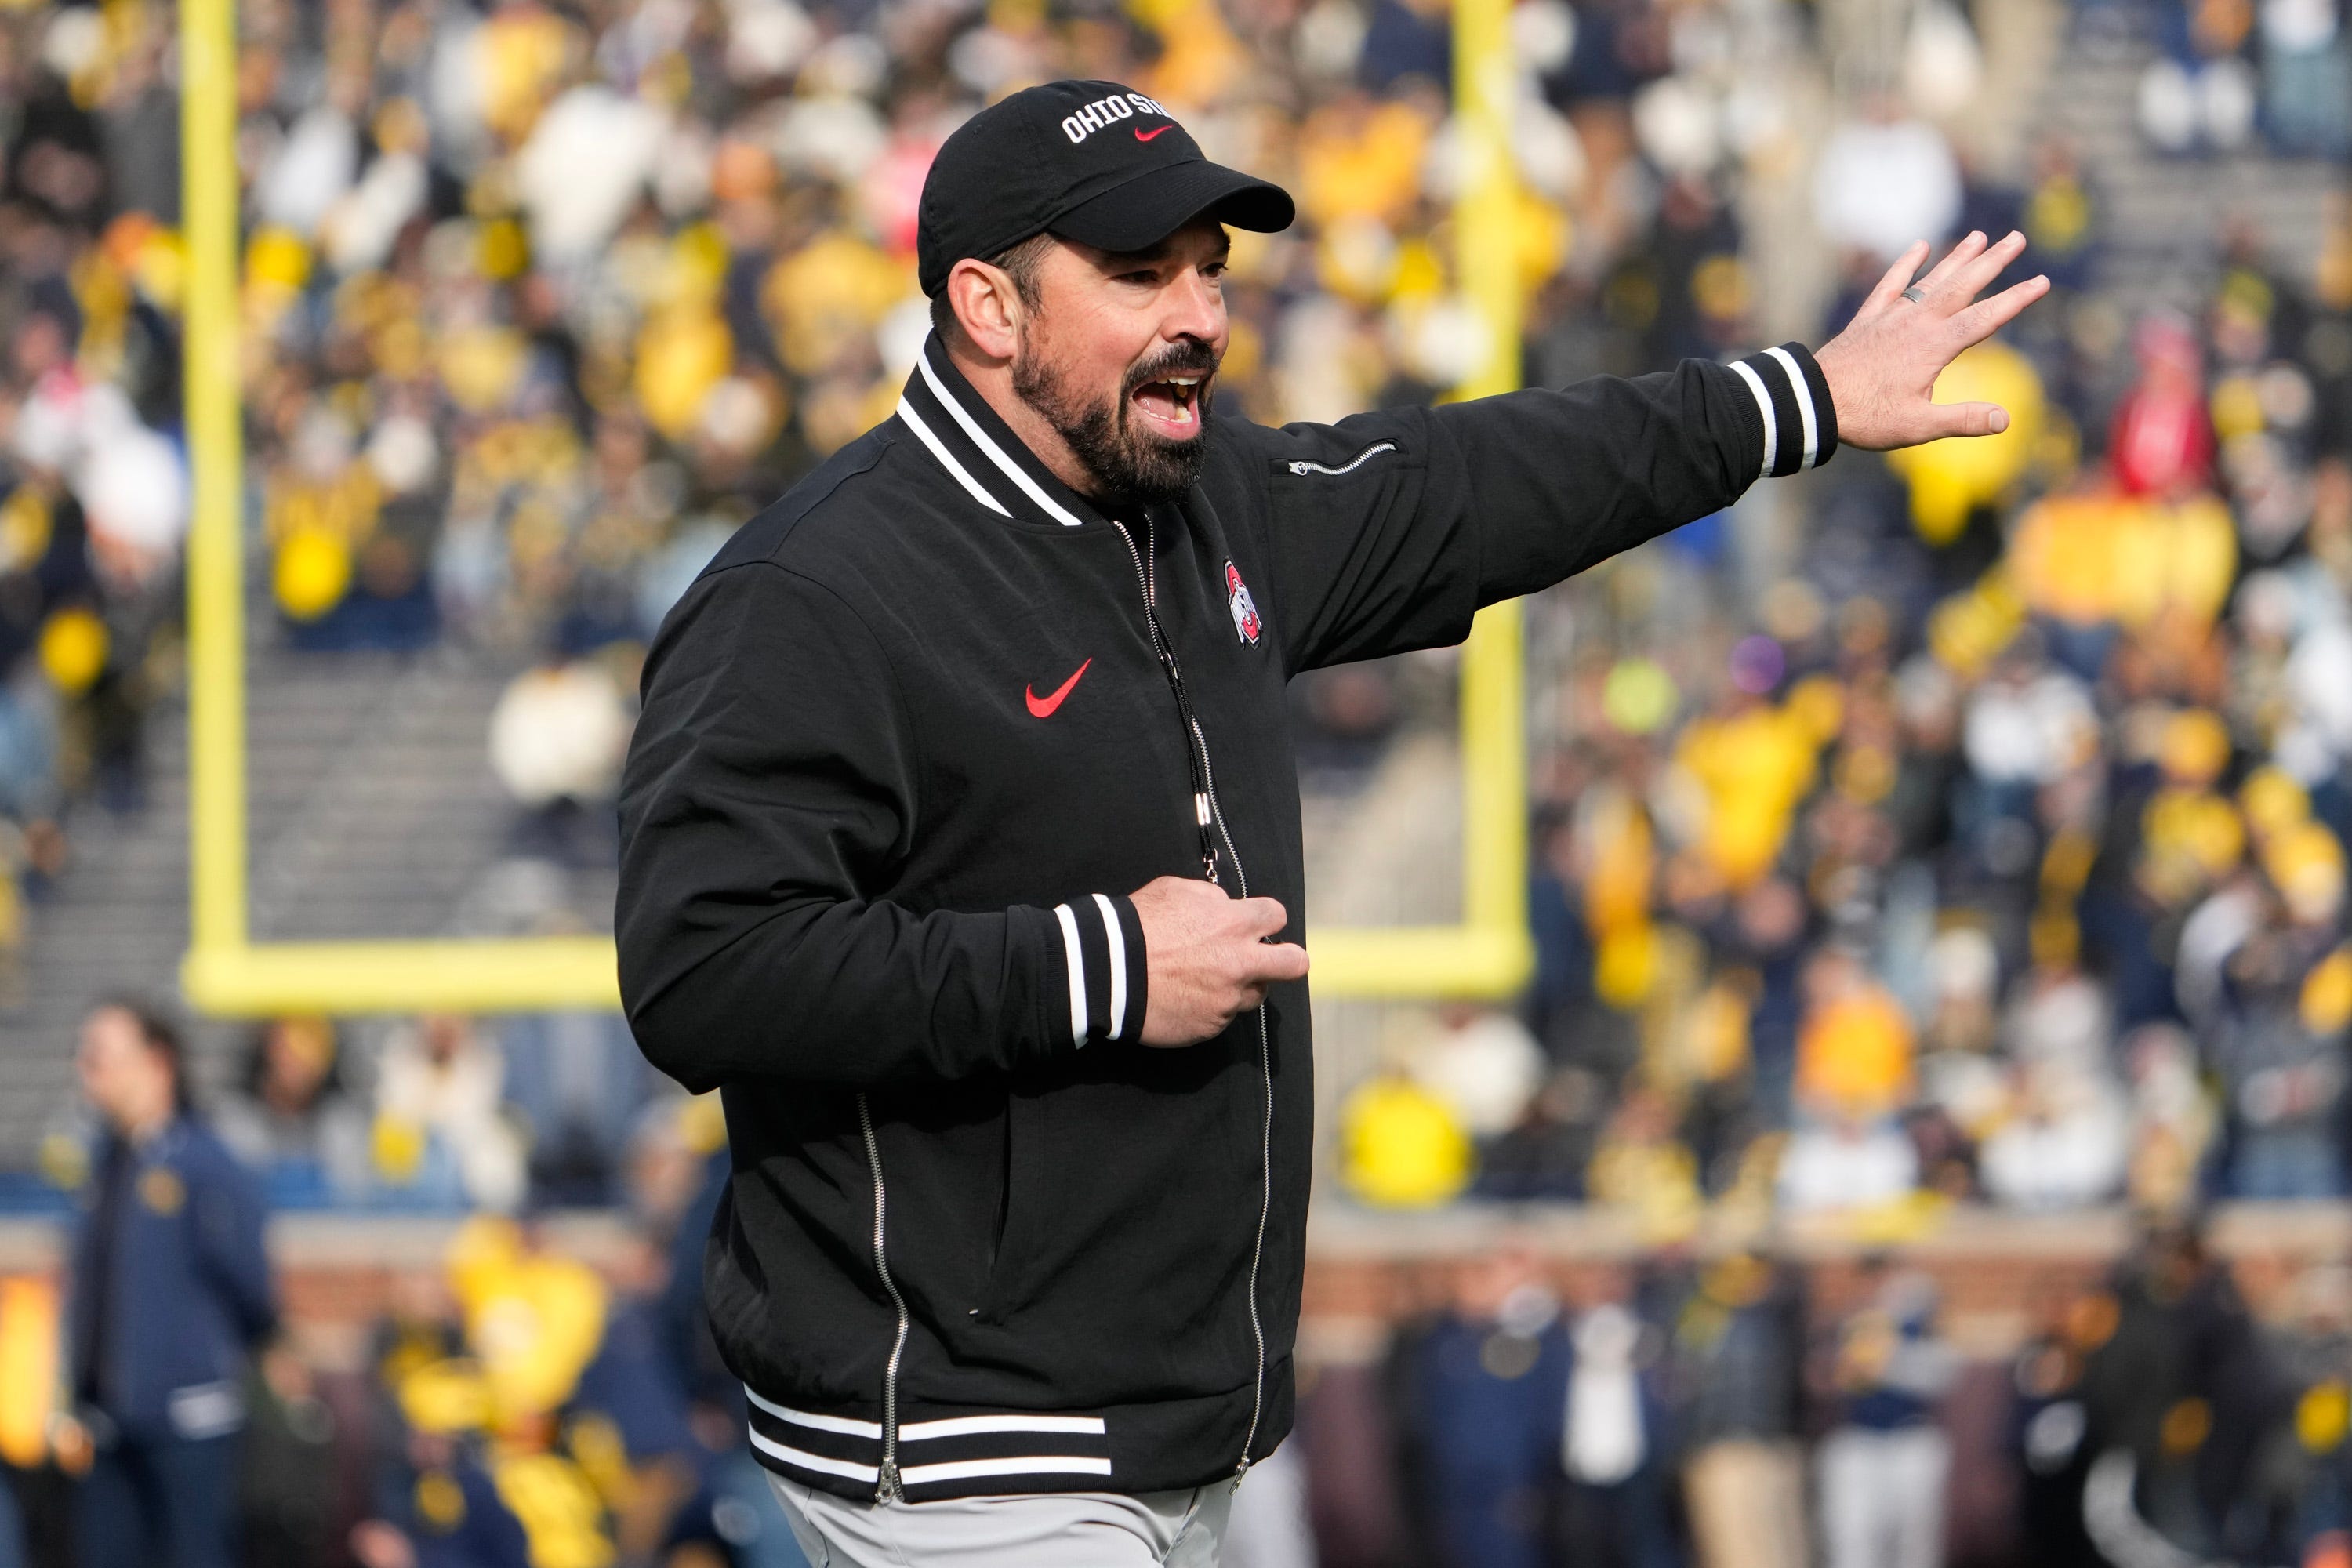 ohio state coach ryan day should consider texas a&m job after latest loss to michigan